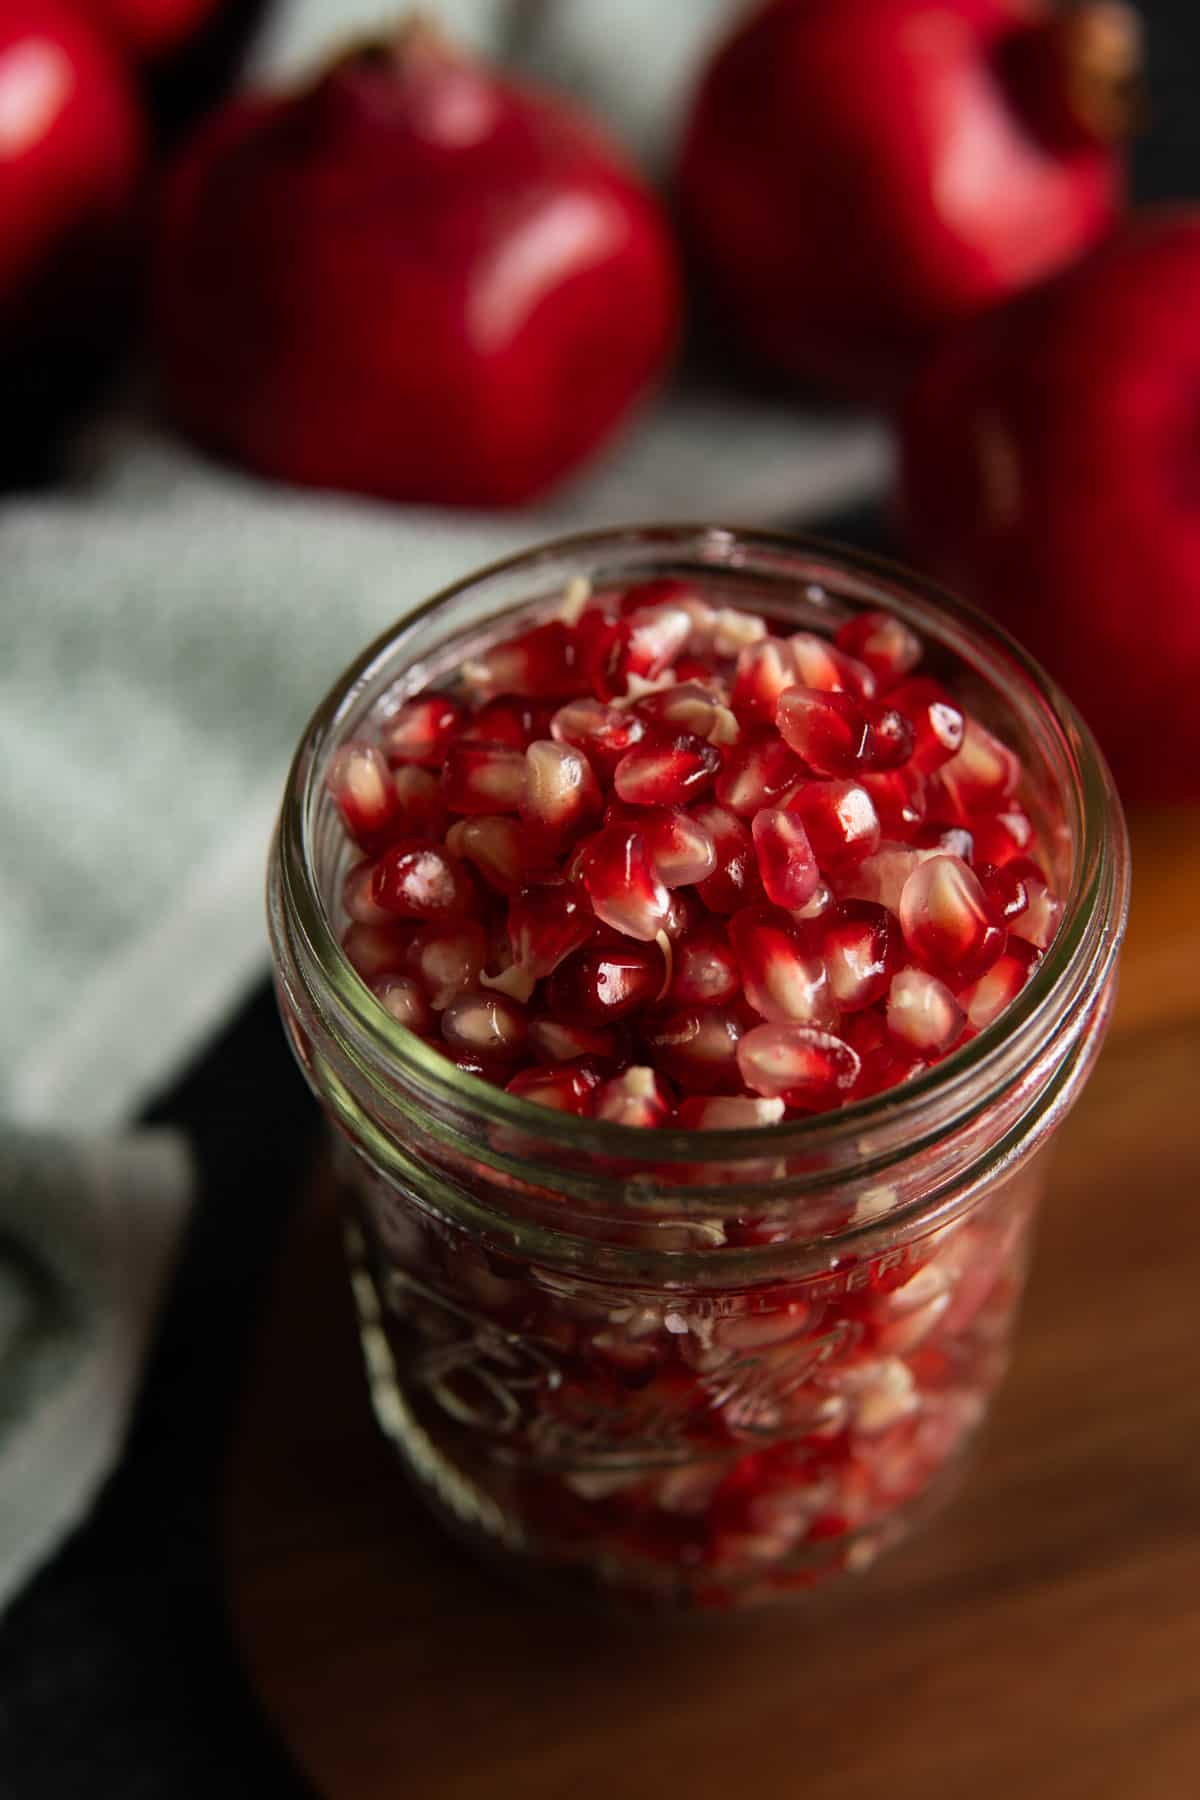 Pomegranate seeds in a jar.